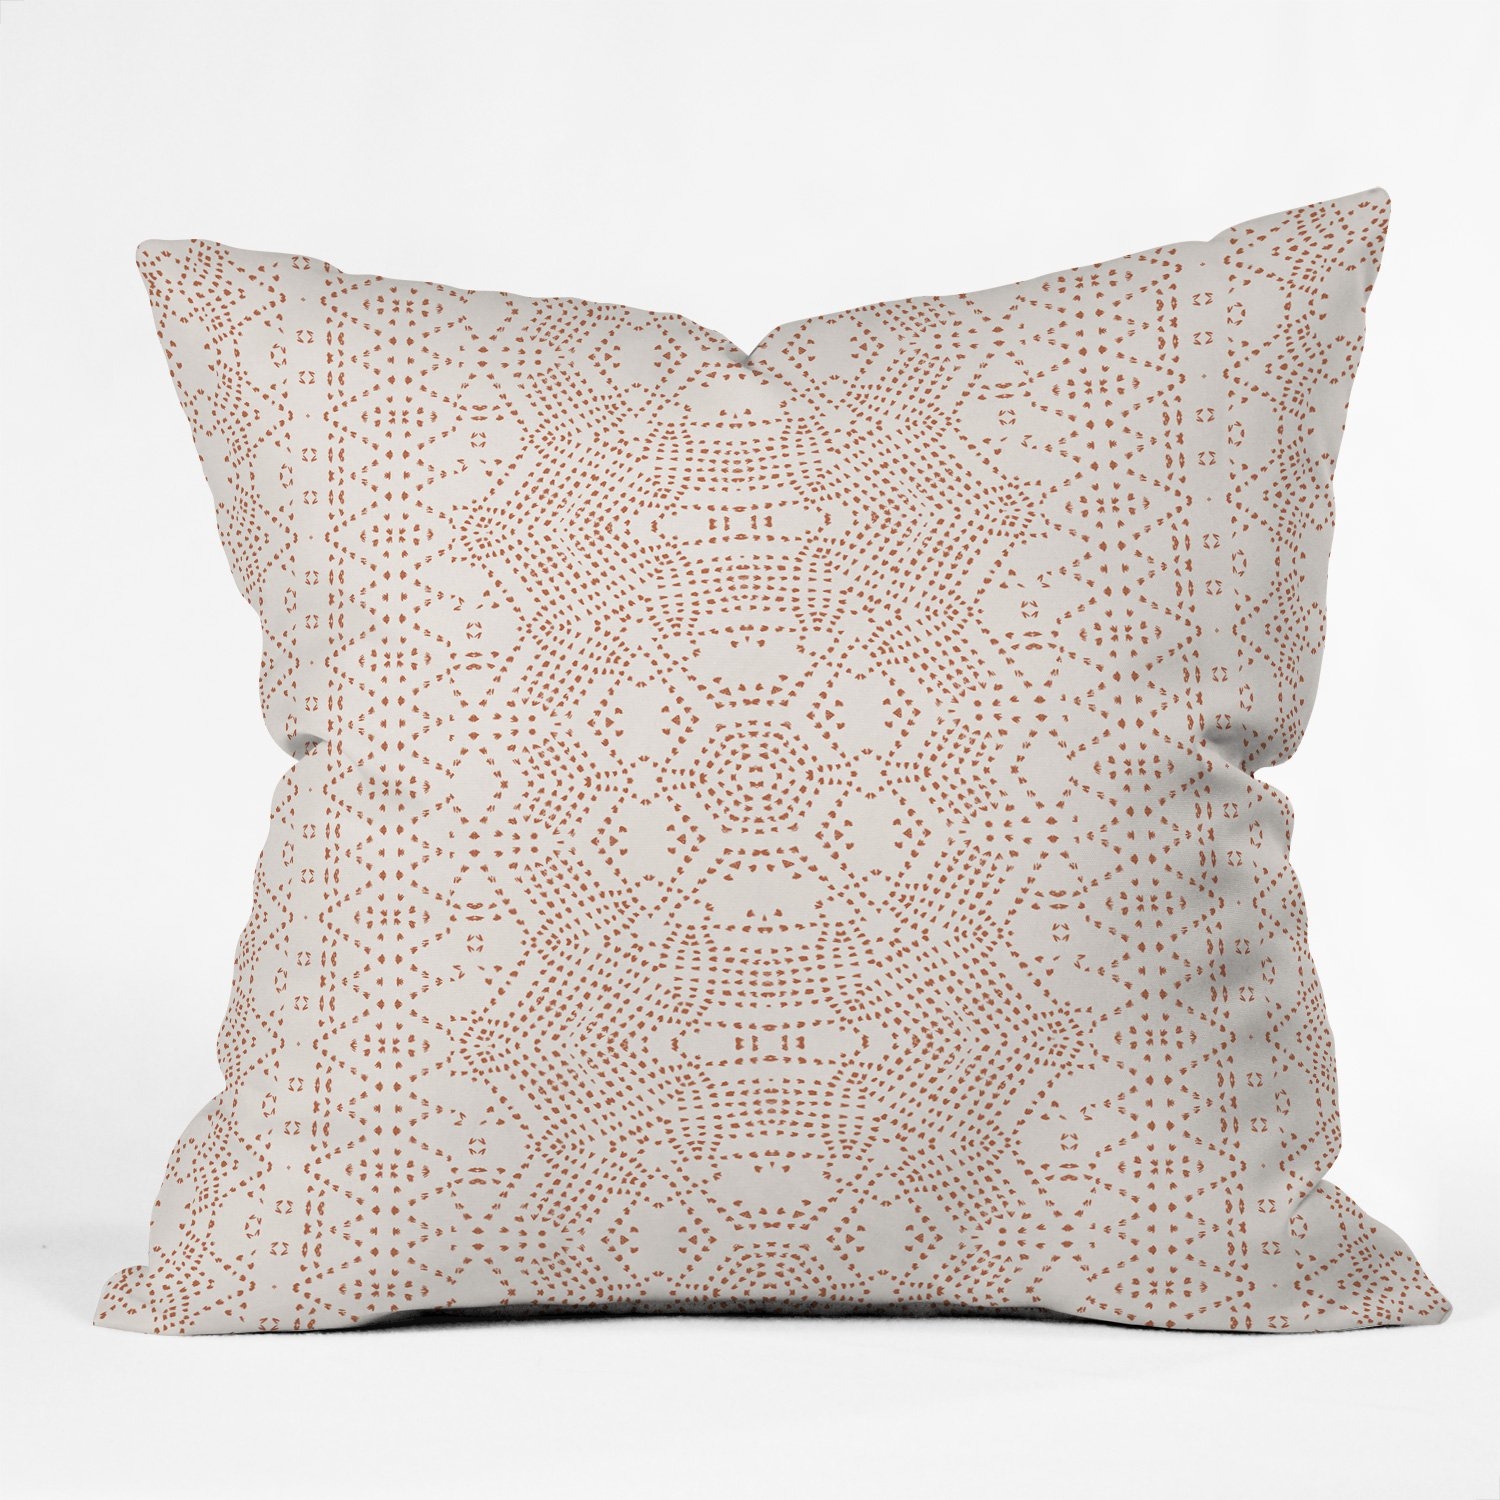 THROW PILLOW -  MARRAKESHI  BY HOLLI ZOLLINGER - 20" x 20" - Polyester insert included - Image 0